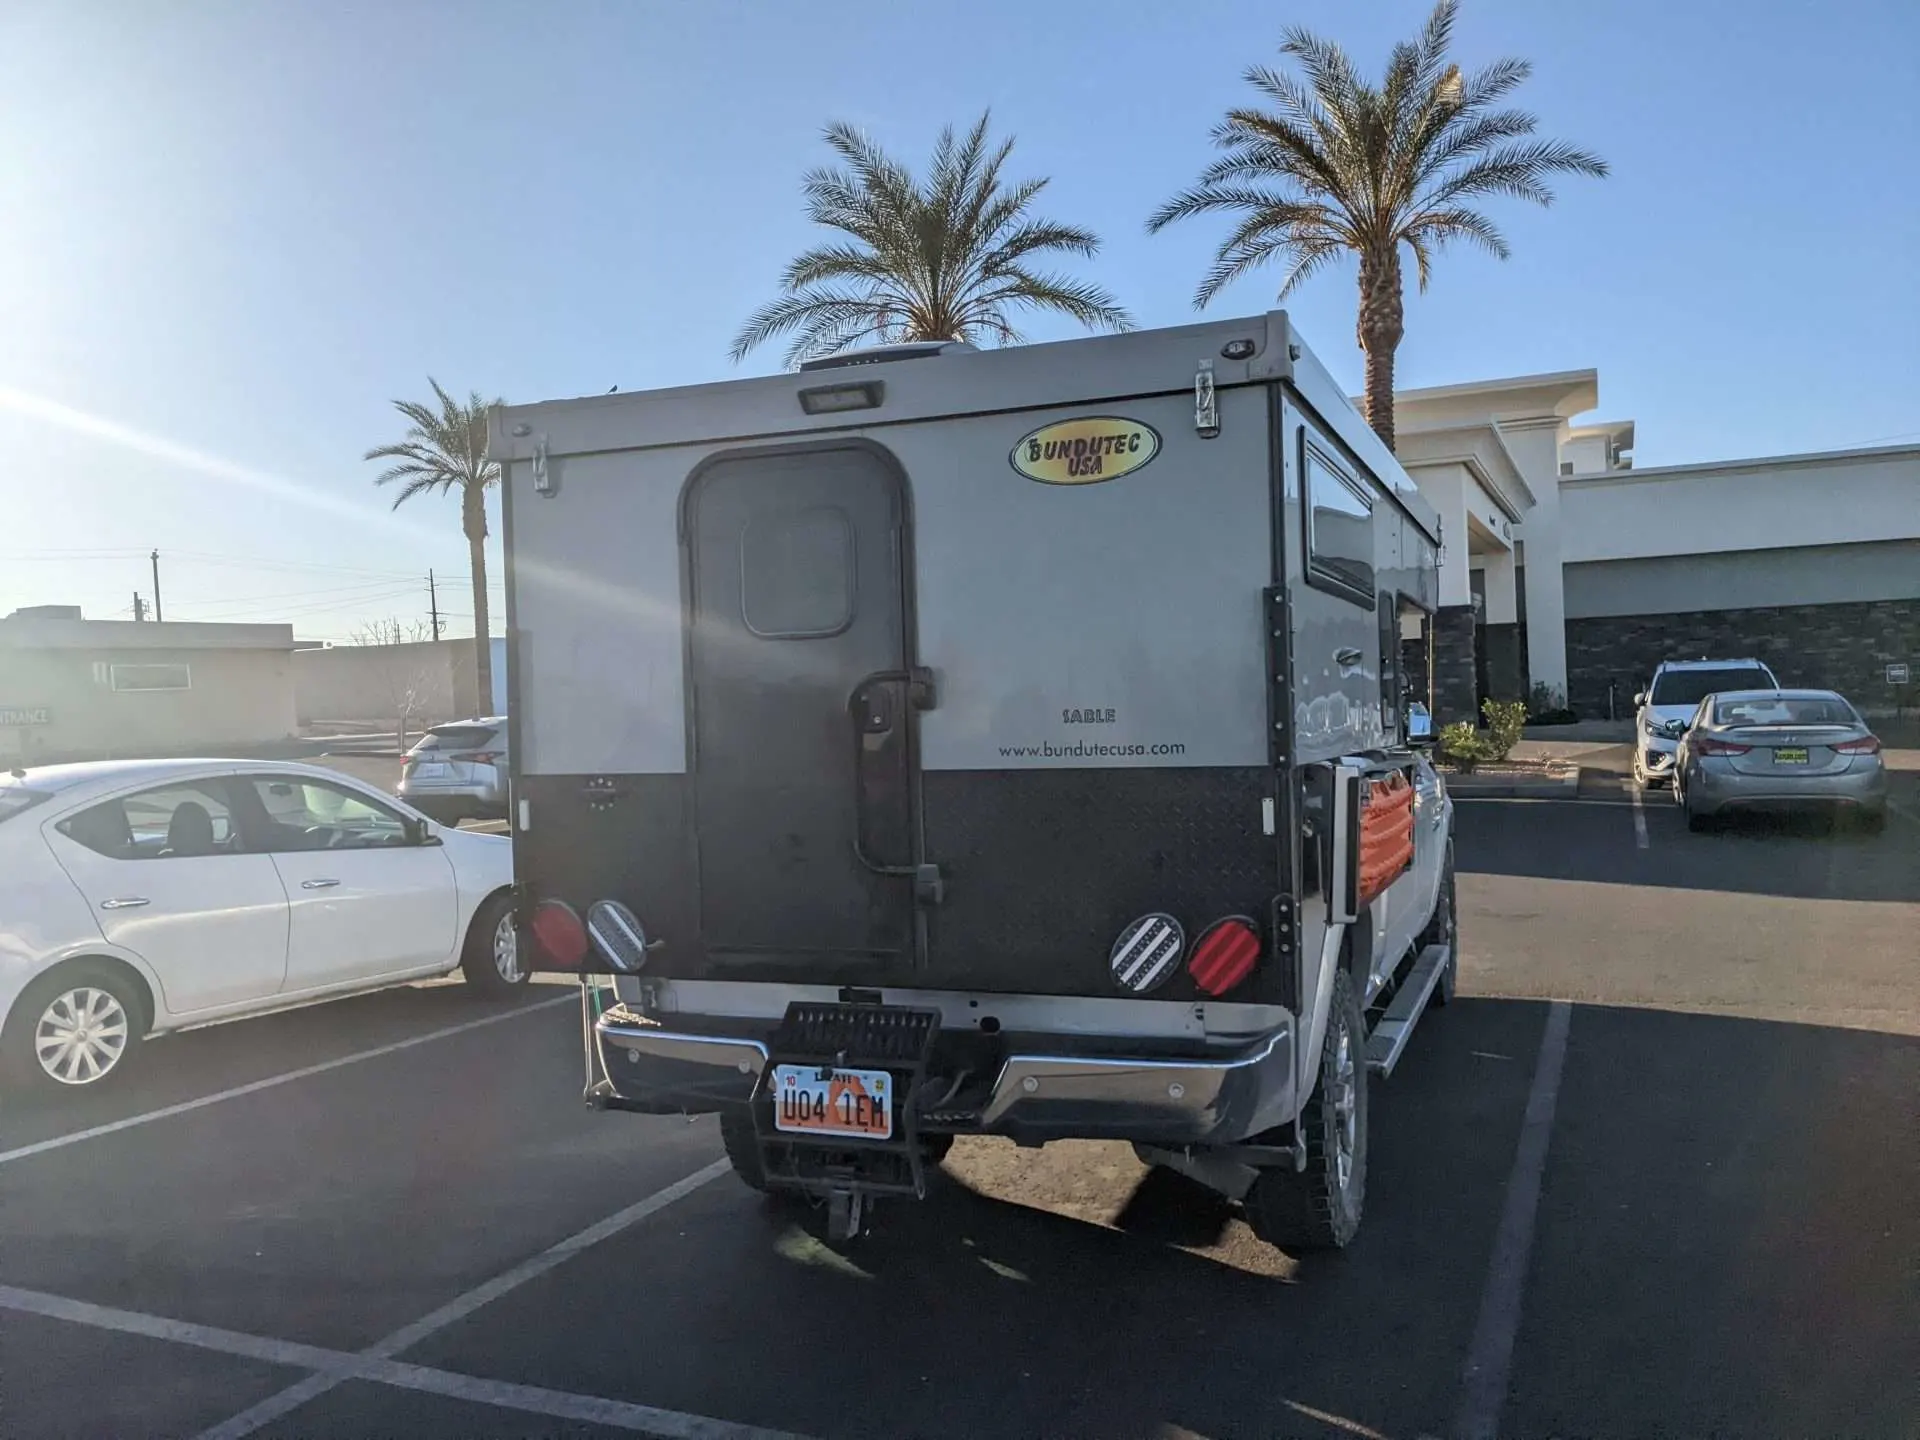 Truck camper parked in parking lot by palm trees while stealth camping in Florida